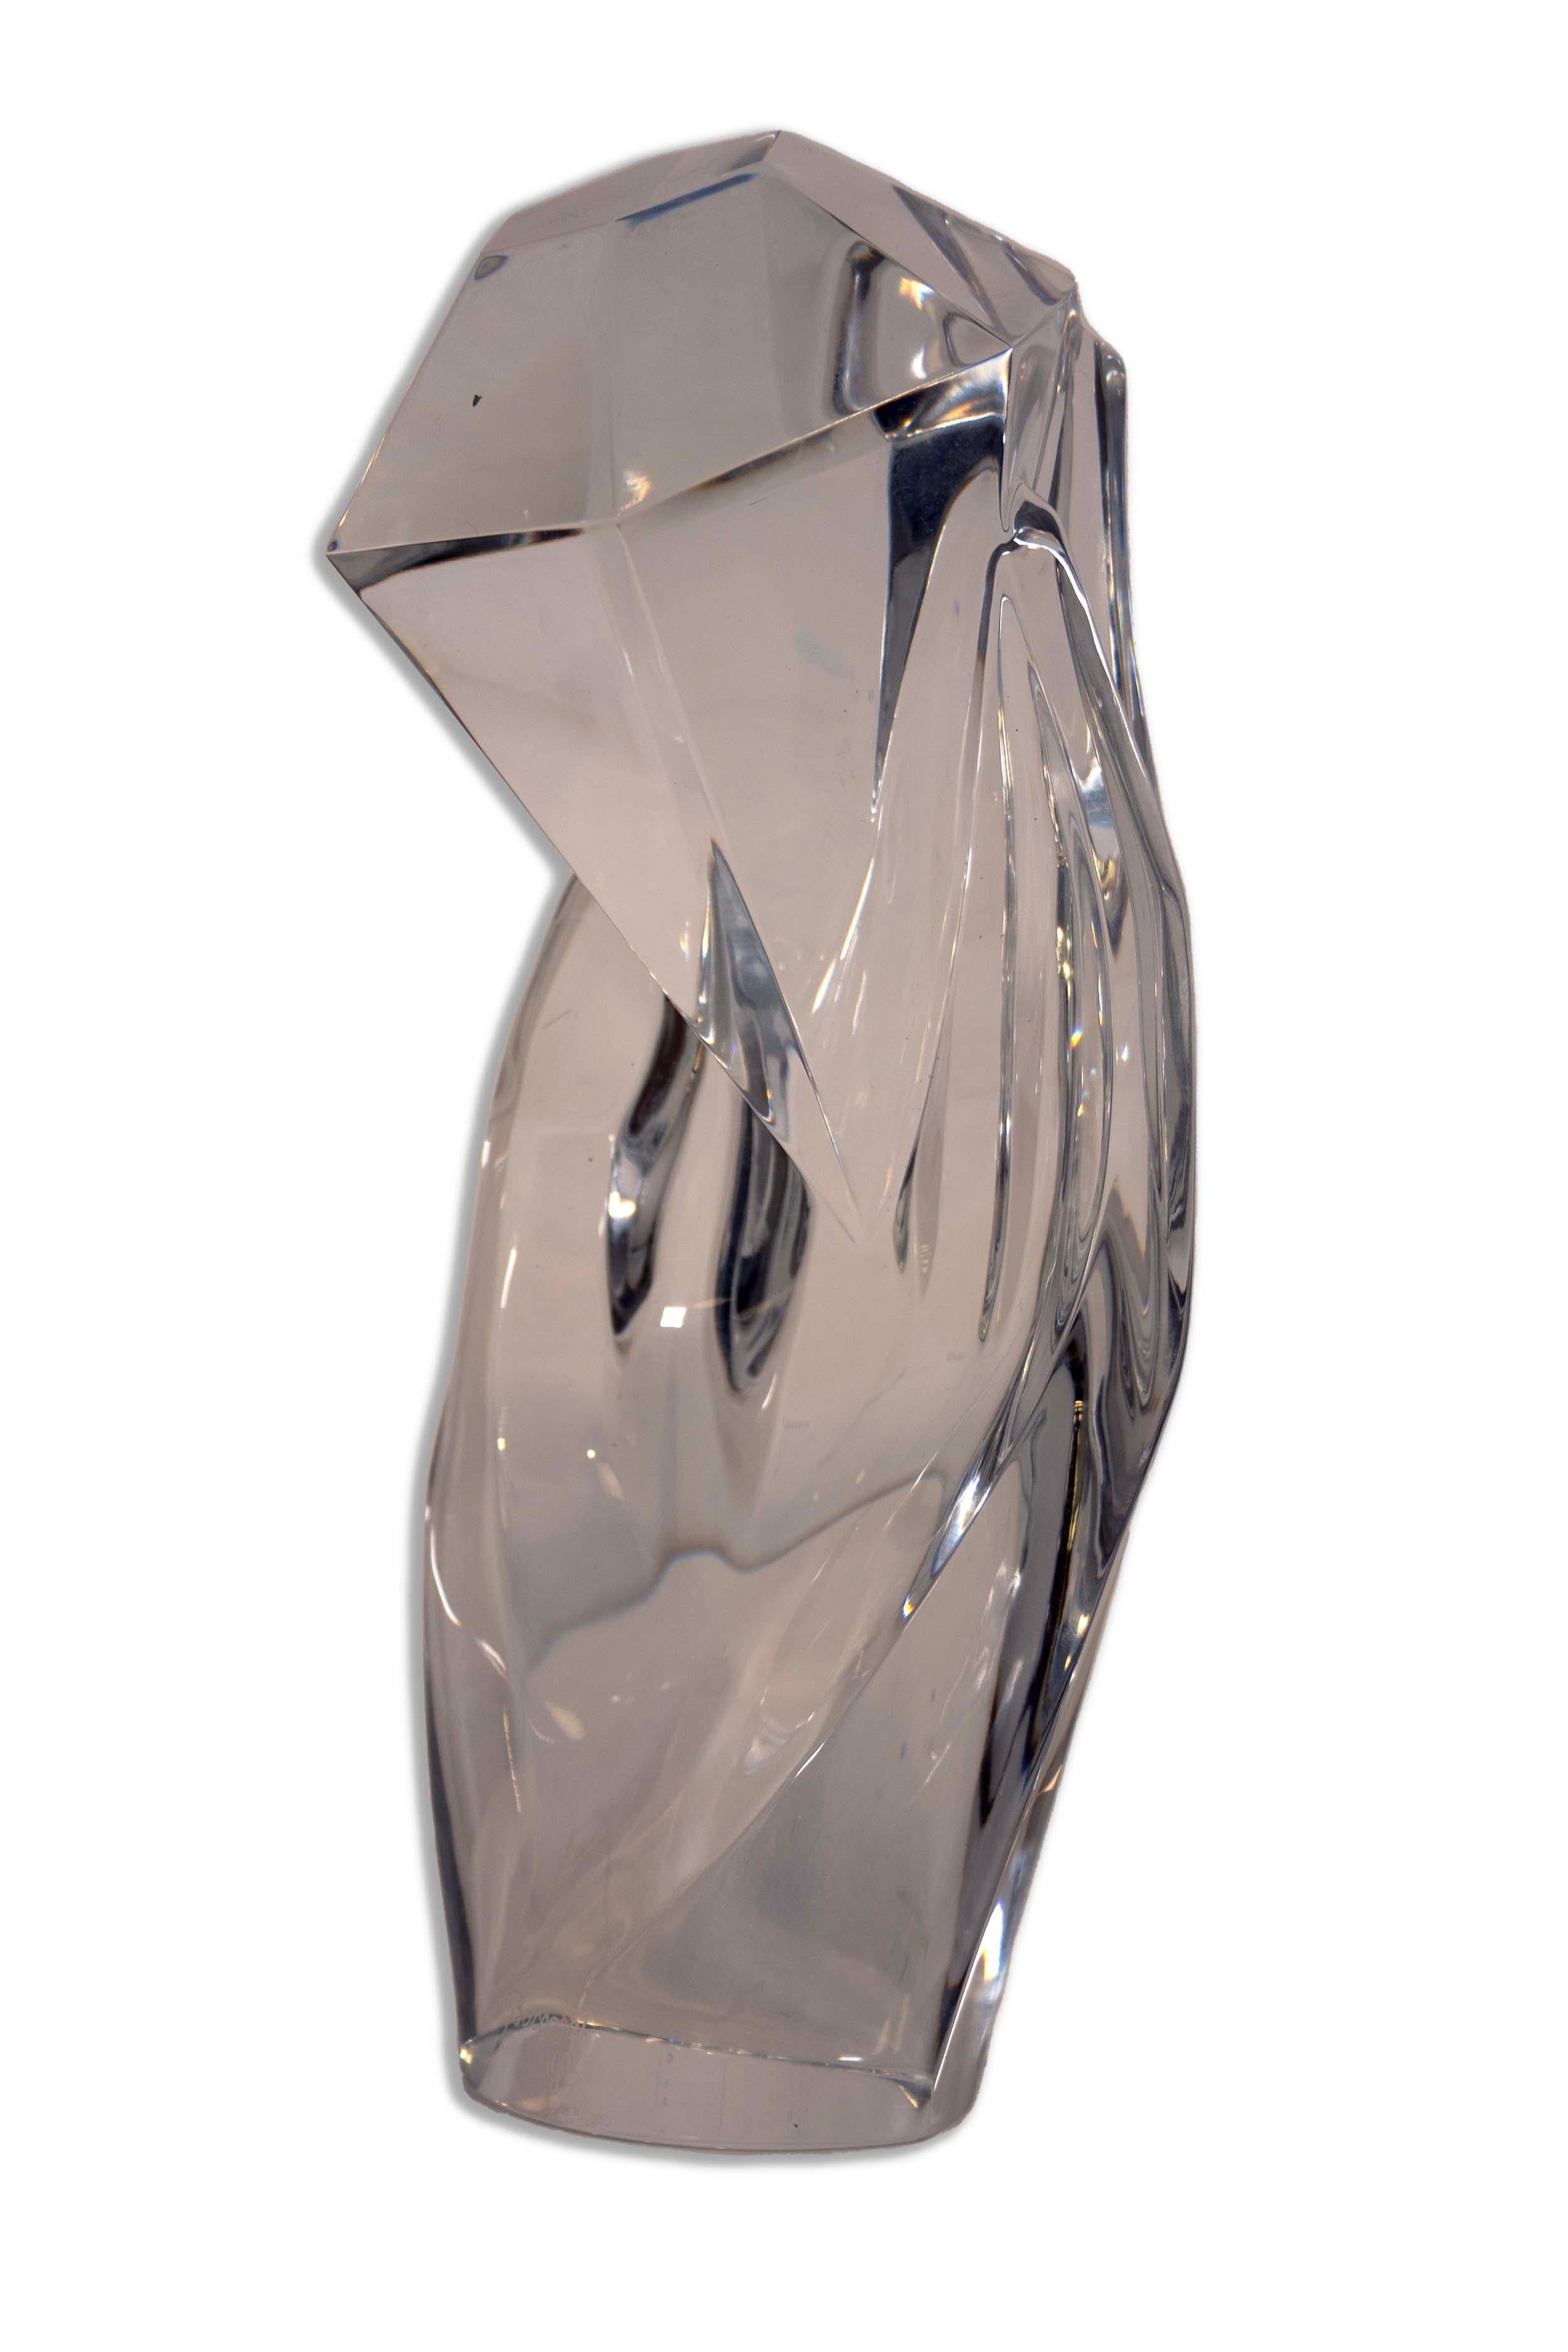 Introducing the Baccarat Hand of Rigot crystal vase, a luxurious and sculptural masterpiece made in France. This exquisite piece is a symbol of elegance, showcasing the iconic Baccarat craftsmanship with its sleek and reflective surface that plays